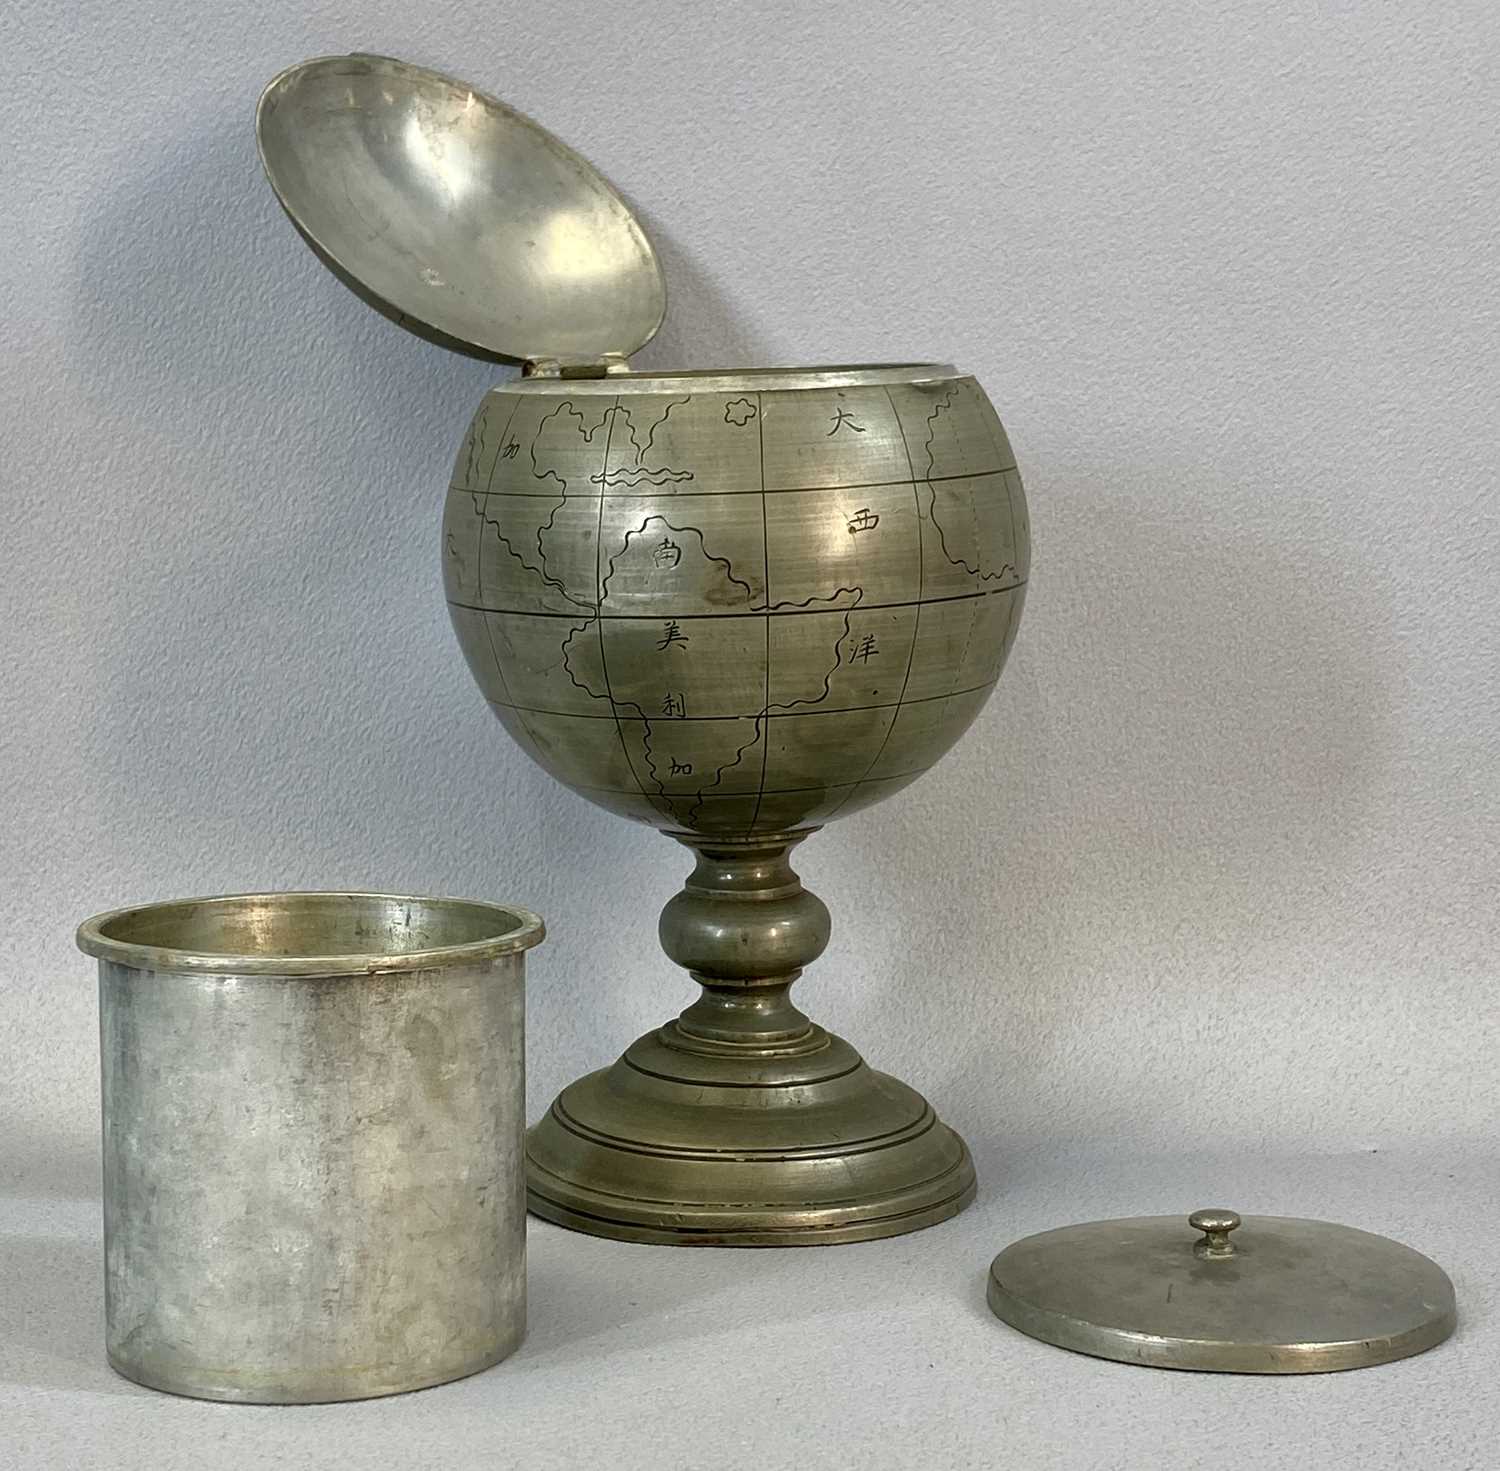 CHINESE PEWTER GLOBE SHAPED PEDESTAL TOBACCO JAR, early 20th century, hinged cover, interior - Image 2 of 5